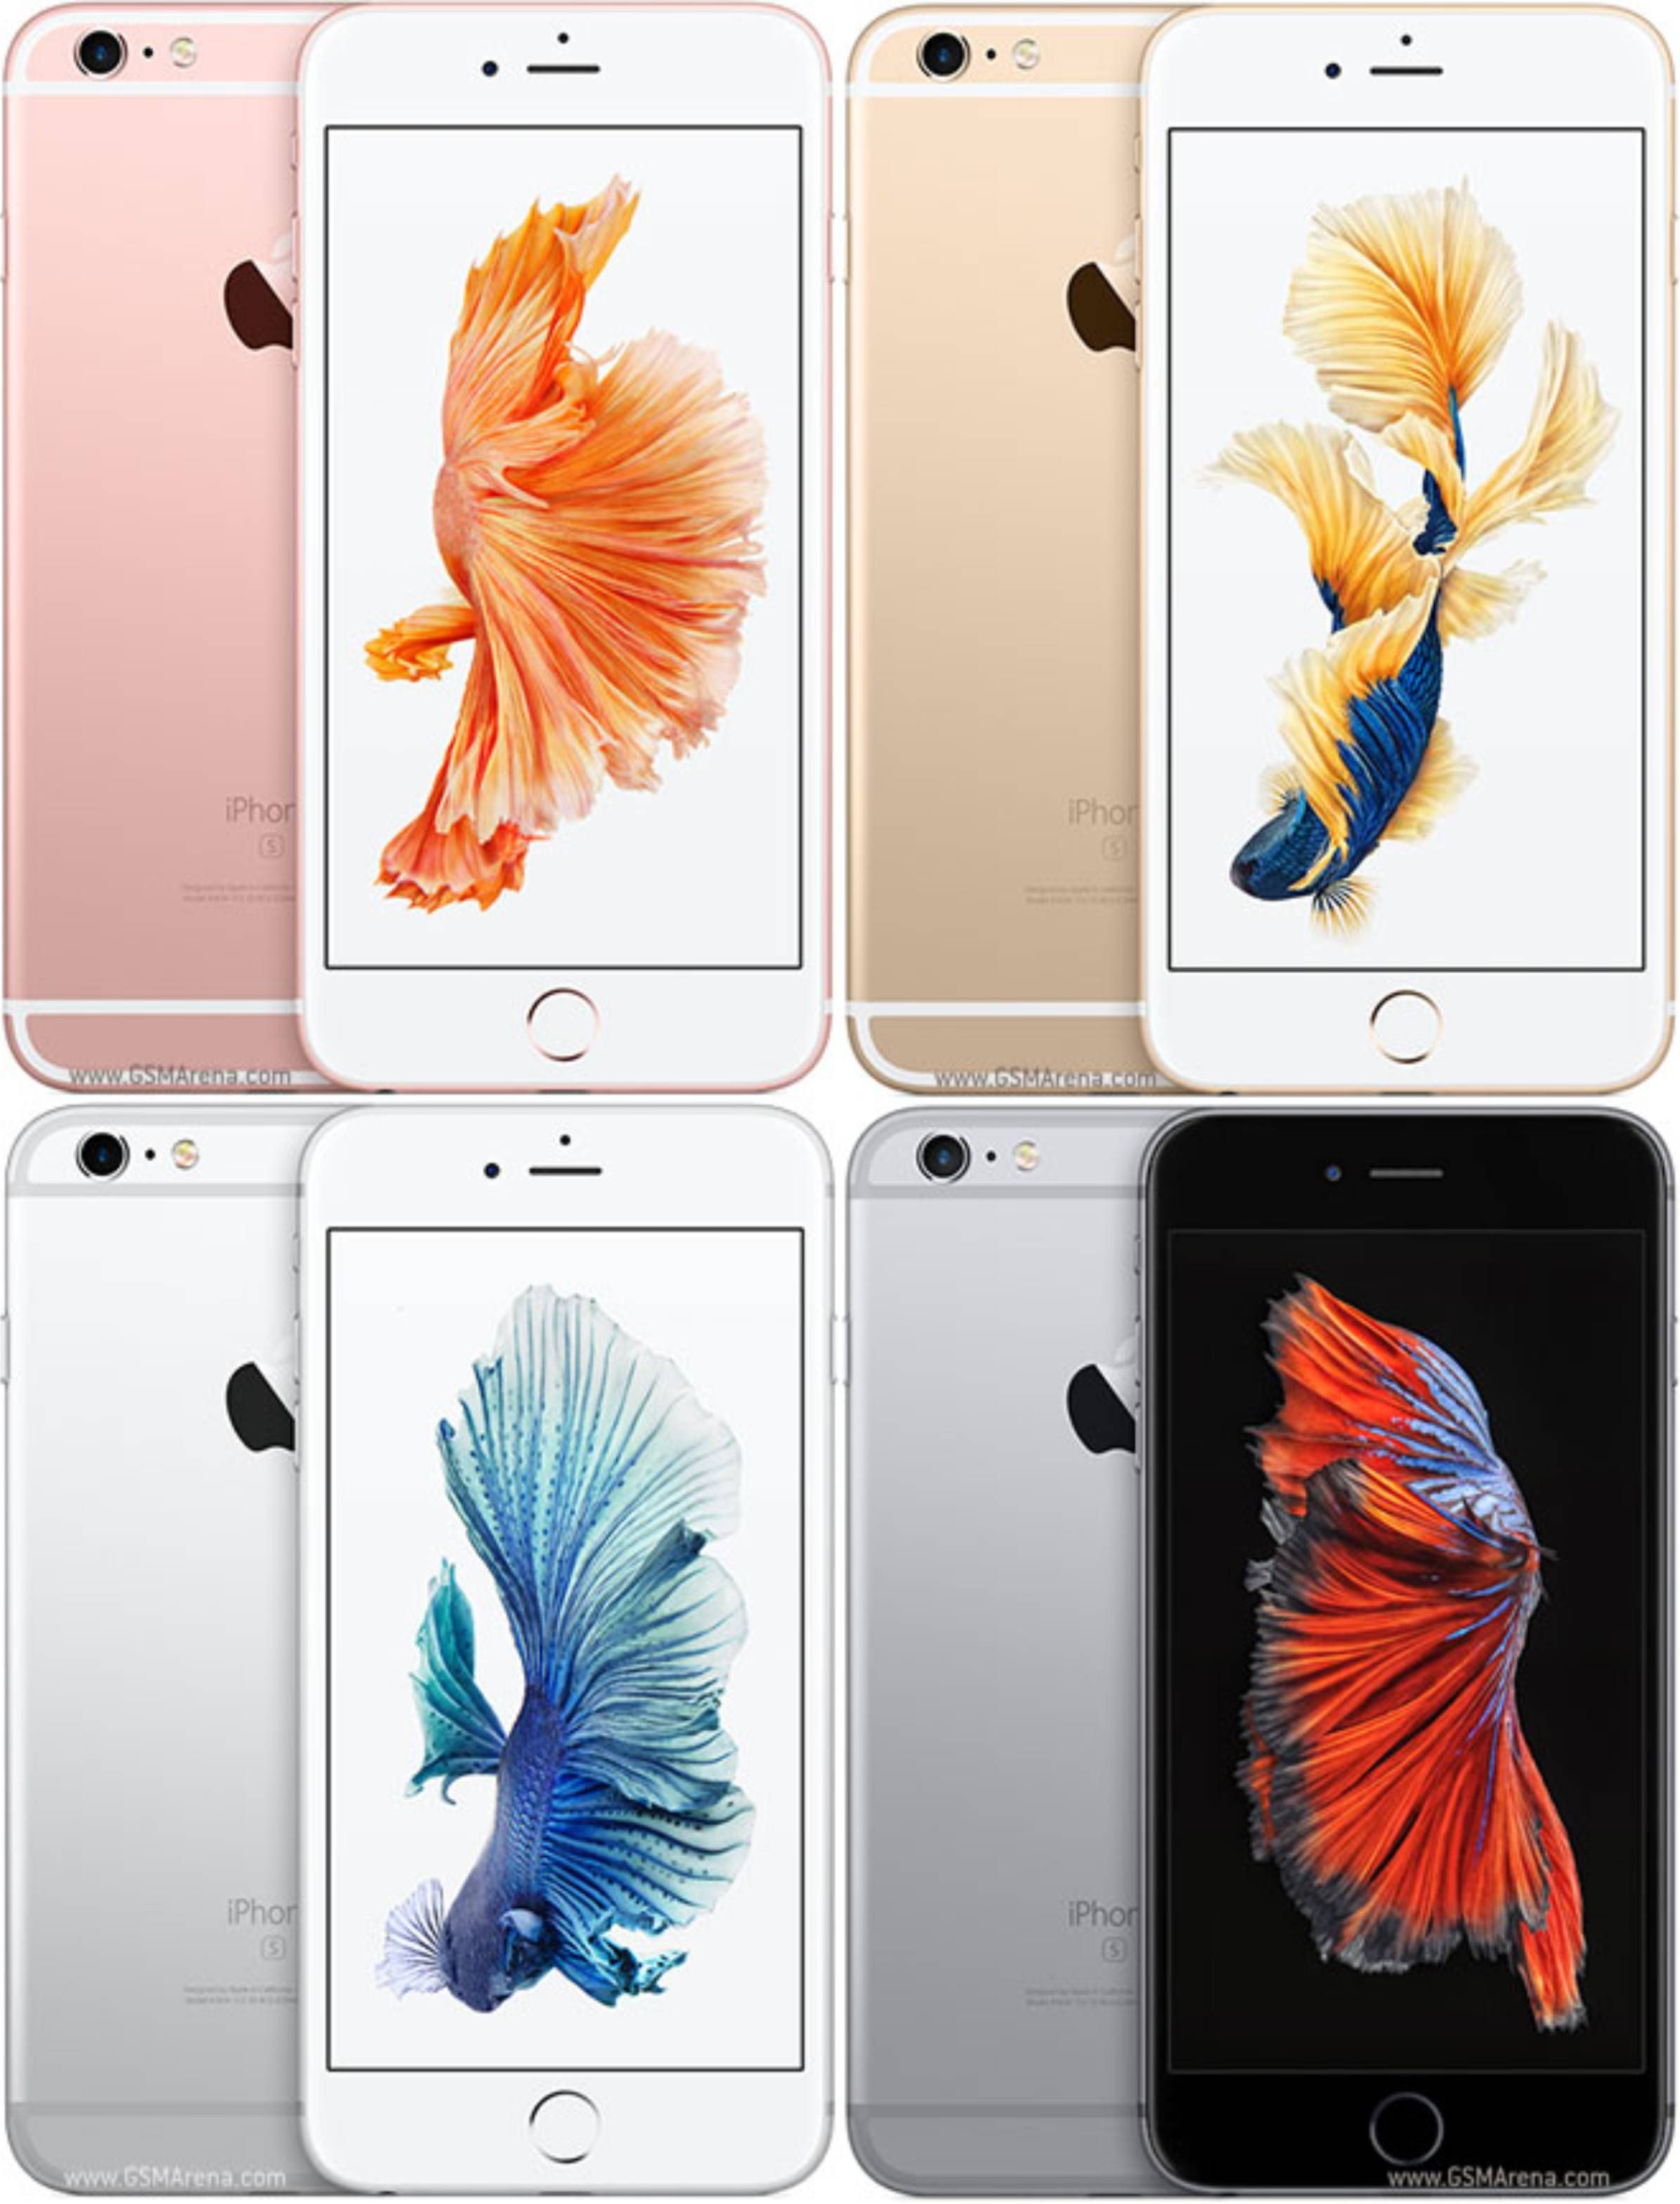 What is Apple iPhone 6 Plus Screen Replacement Cost in Kenya?